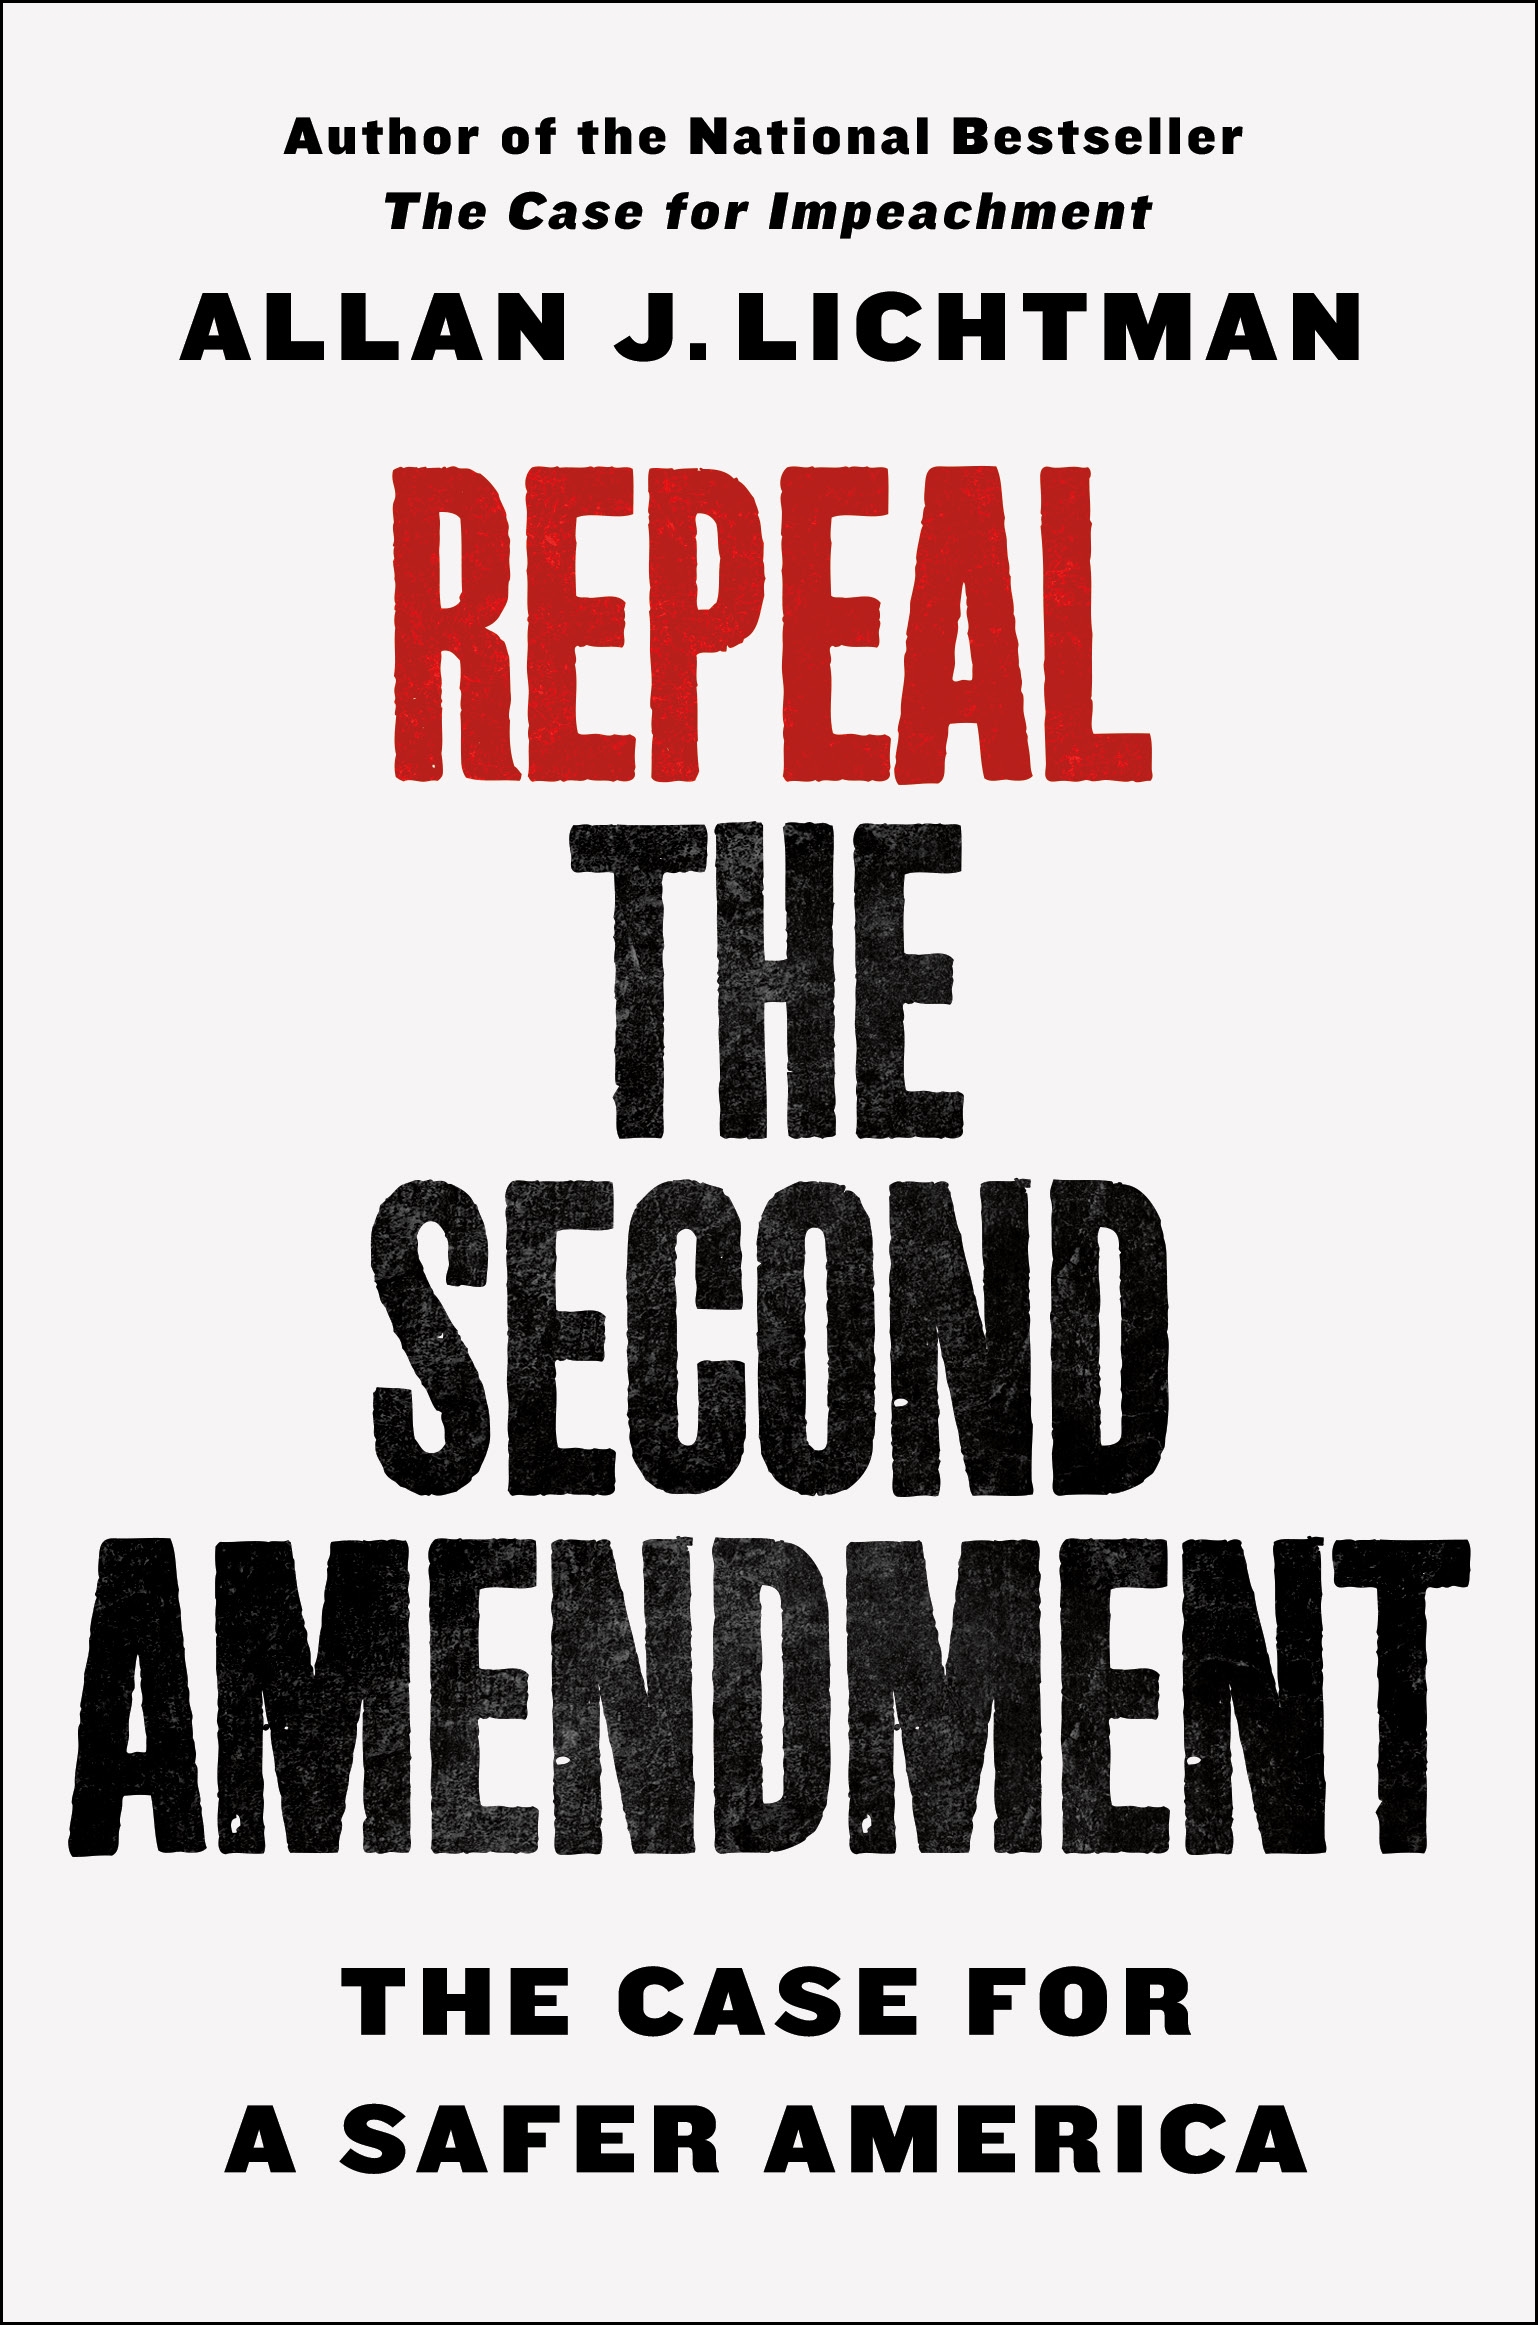 Book “Repeal the Second Amendment” by Allan J. Lichtman — January 28, 2020